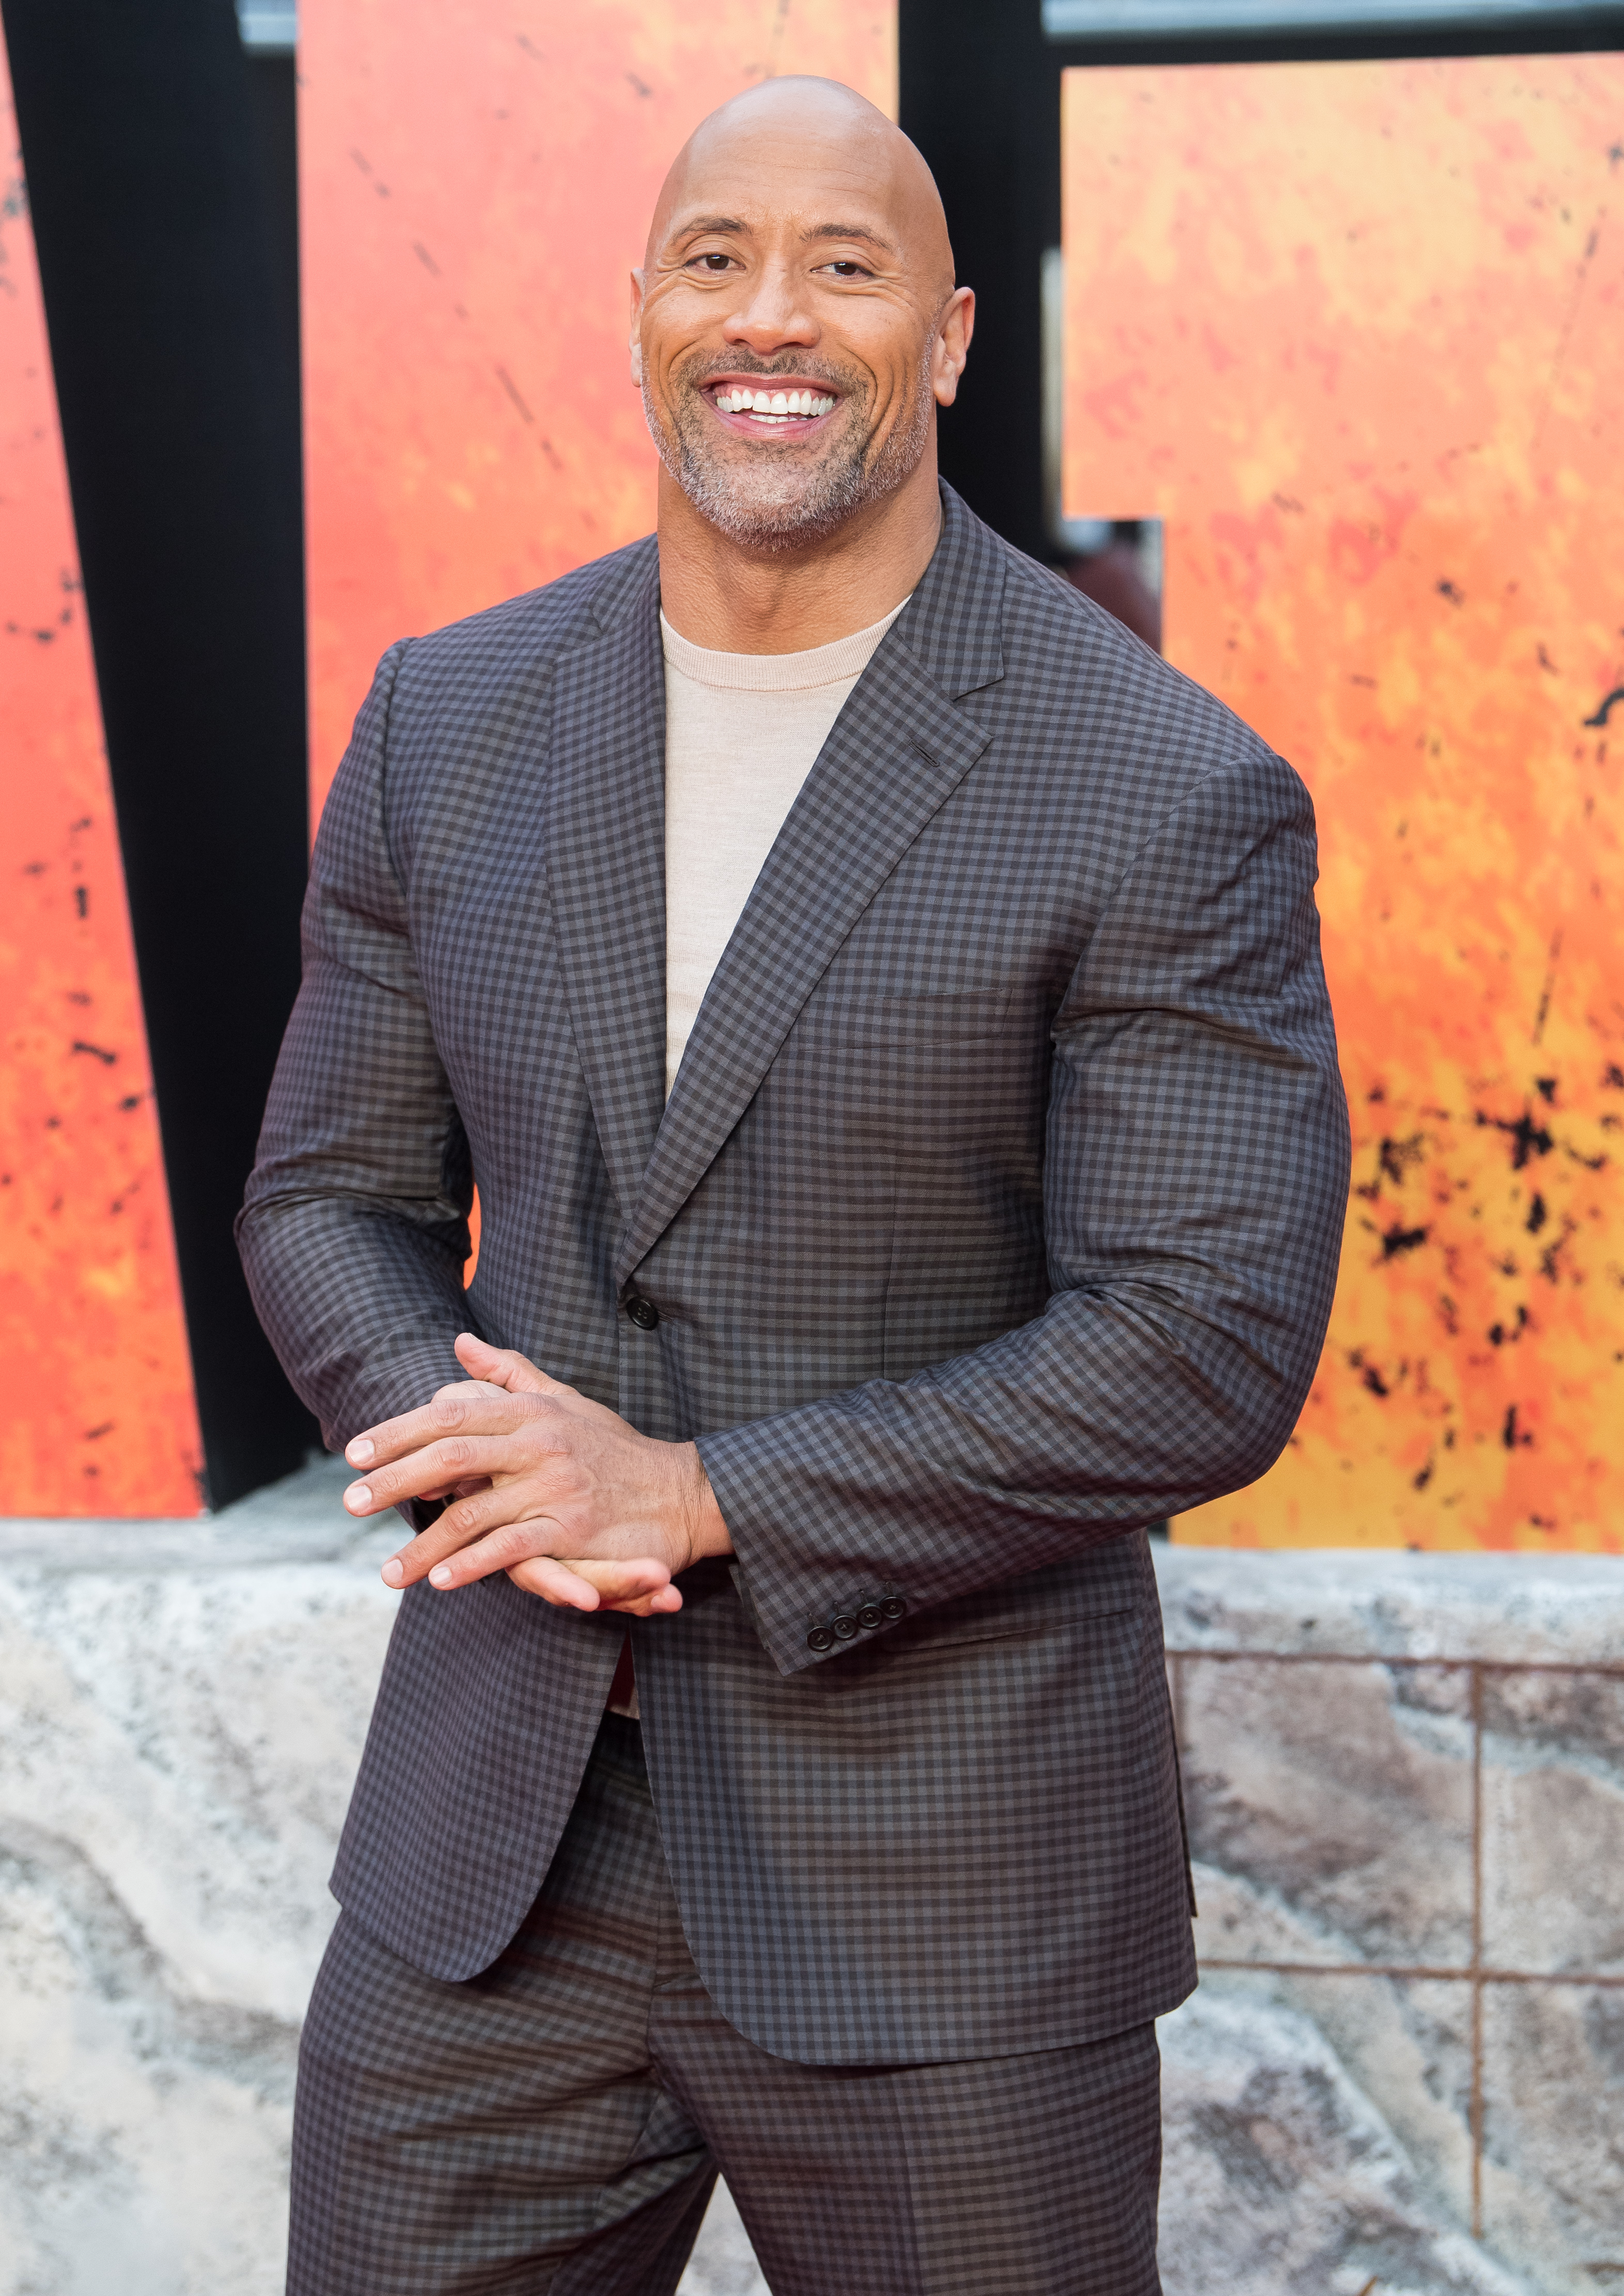 Dwayne Johnson attends the European premiere of "Rampage" on April 11, 2018 in London, England | Source: Getty Images